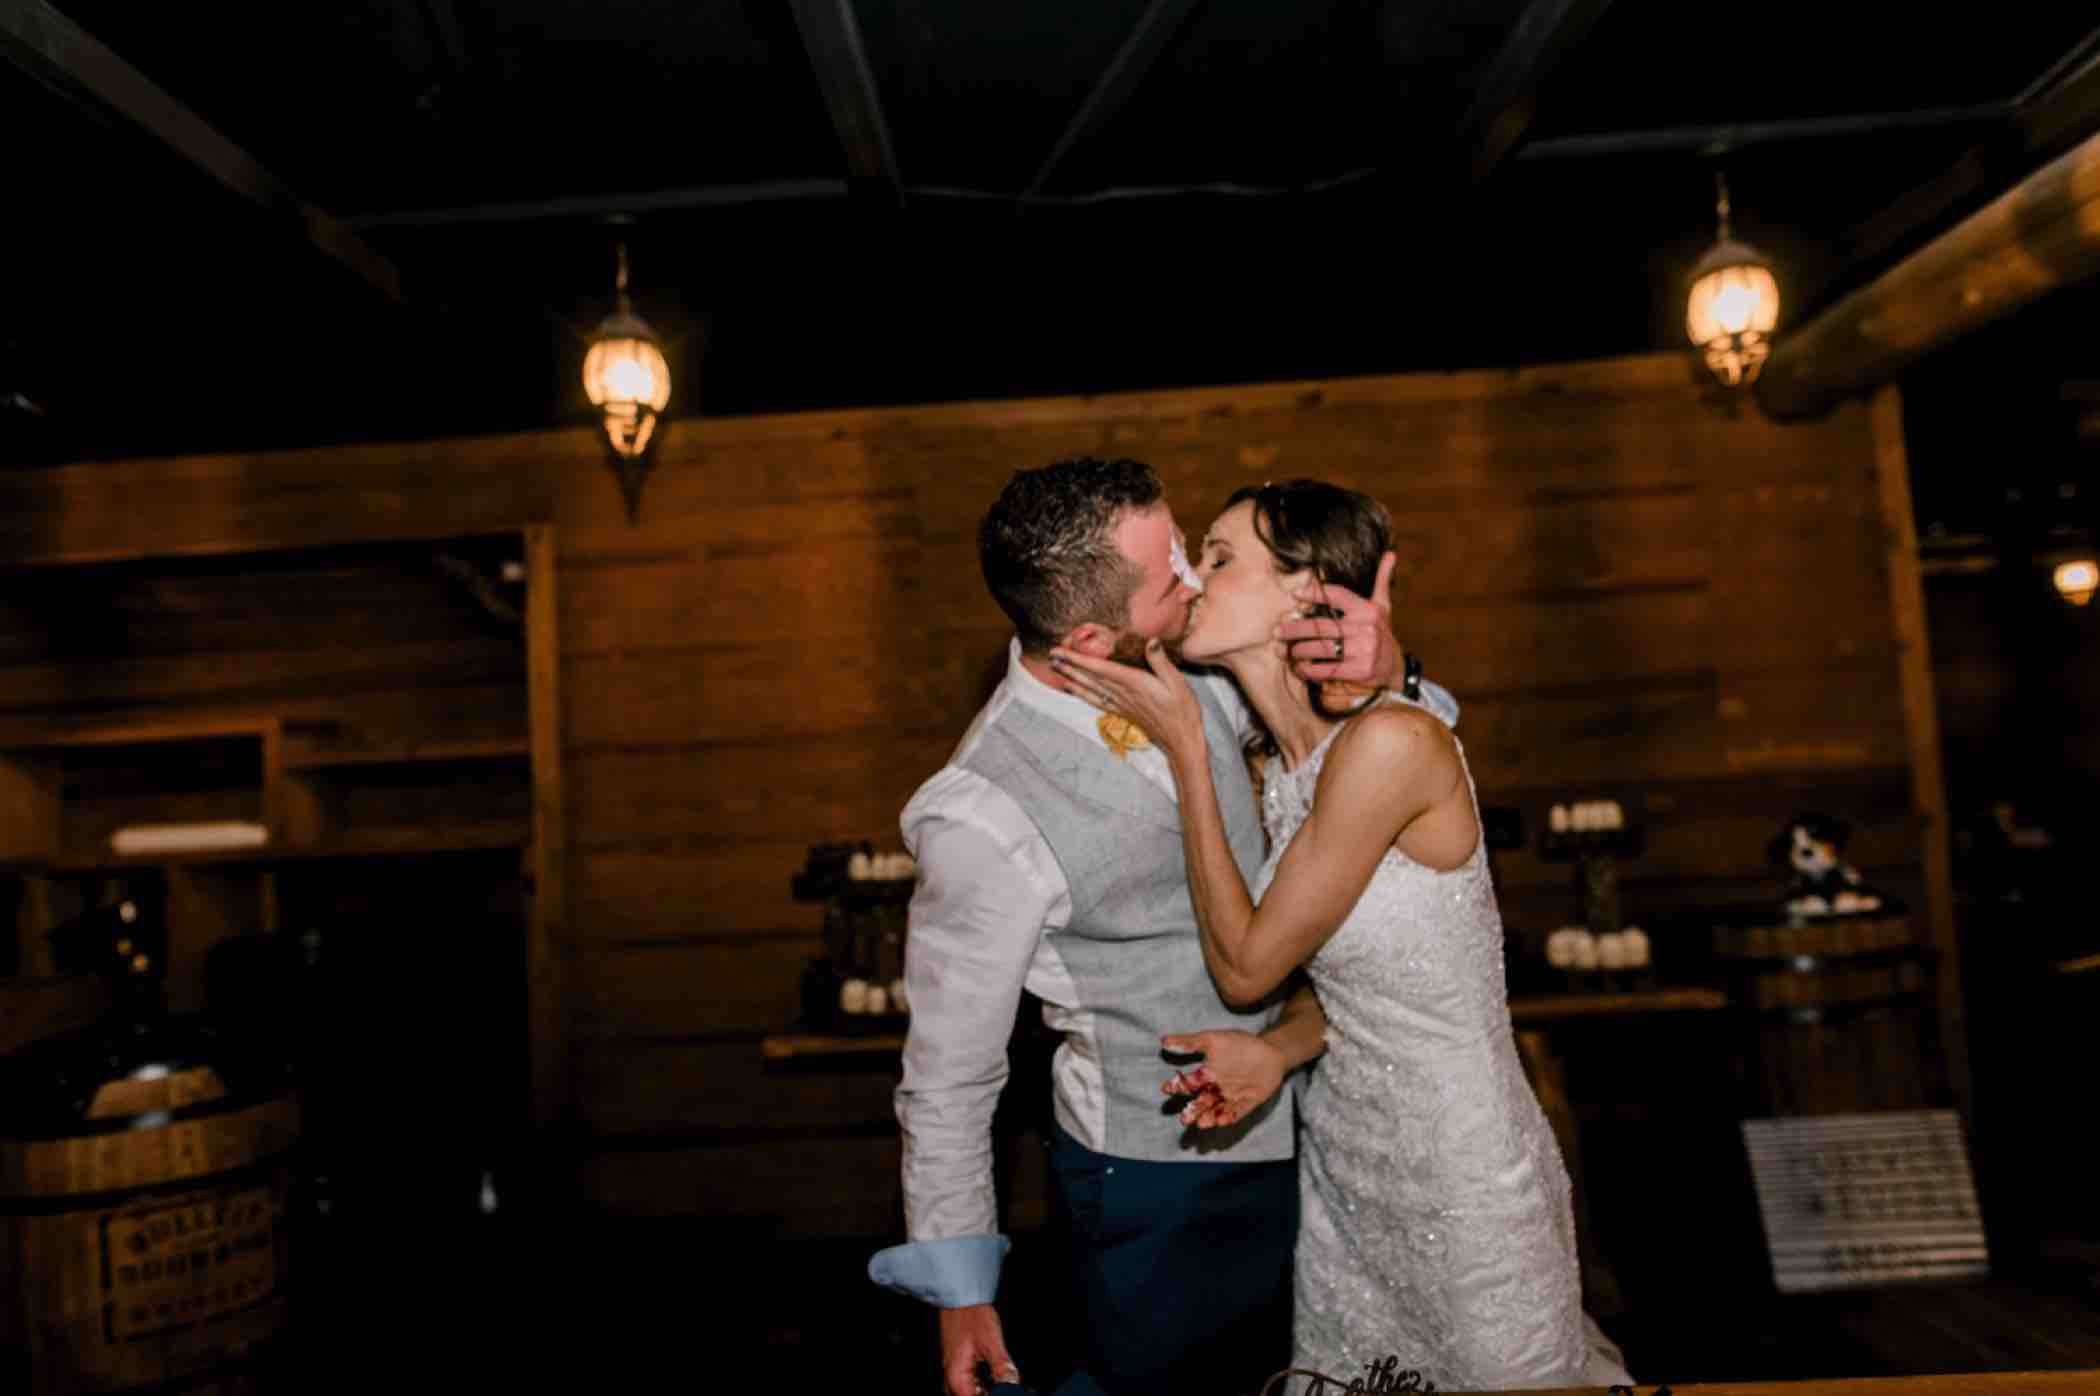 After smashing cake in each other's faces, the bride and groom share a kiss after cutting the cake at their wedding reception at Piney River Ranch in Vail, Colorado. Photo by Ali and Garrett, Romantic, Adventurous, Nostalgic Wedding Photographers.